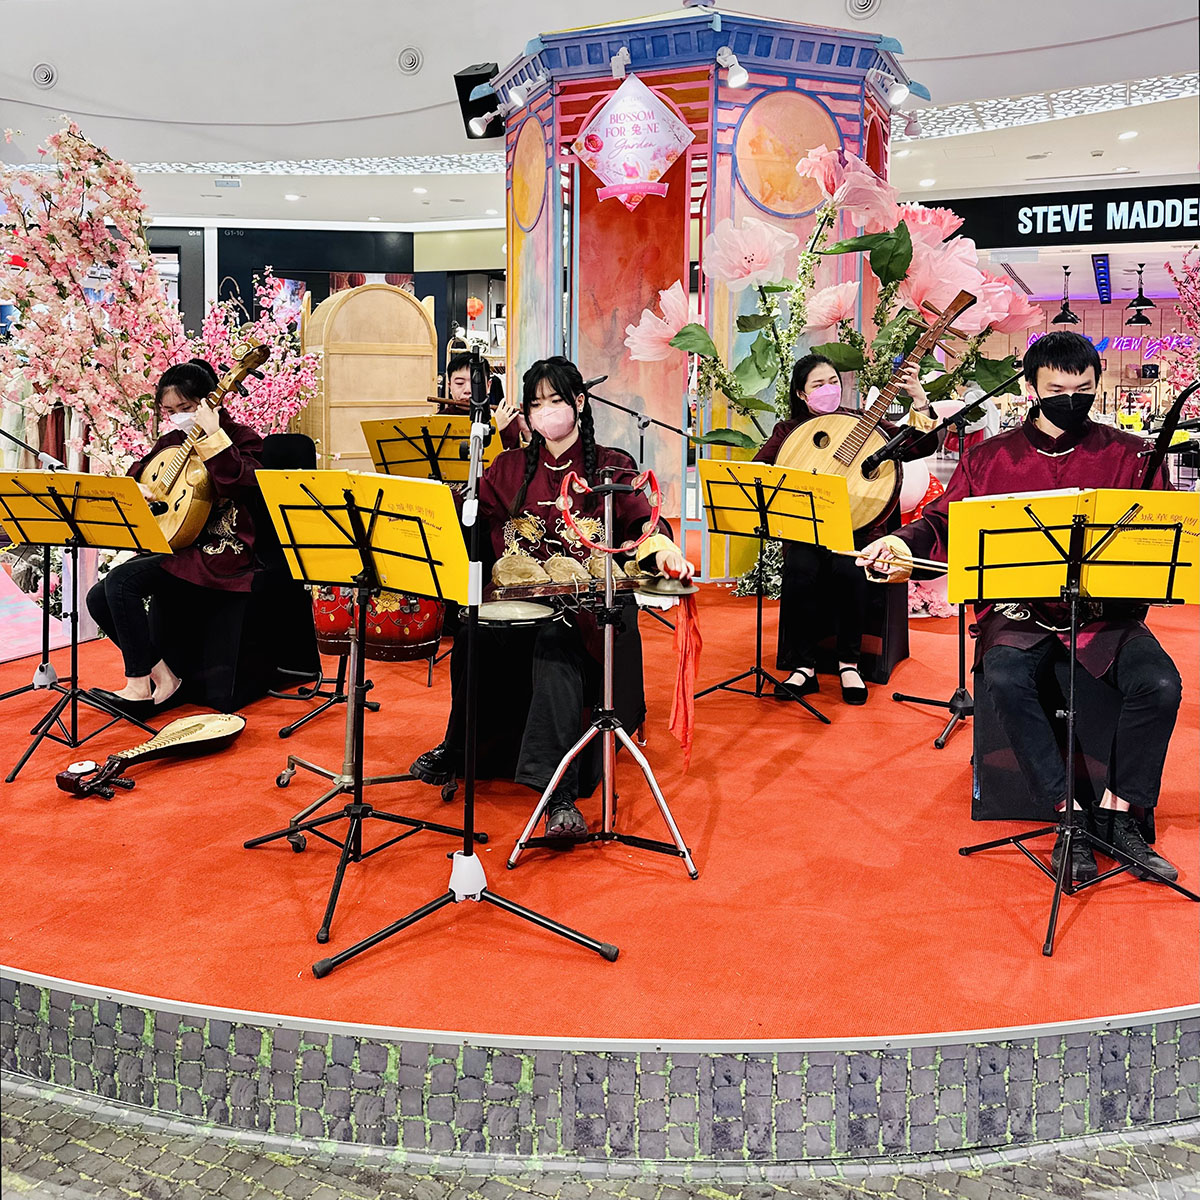 Nothing says Chinese New Year like playing instrumental music in the background for a blissful vibe while visitors run their shopping errands.